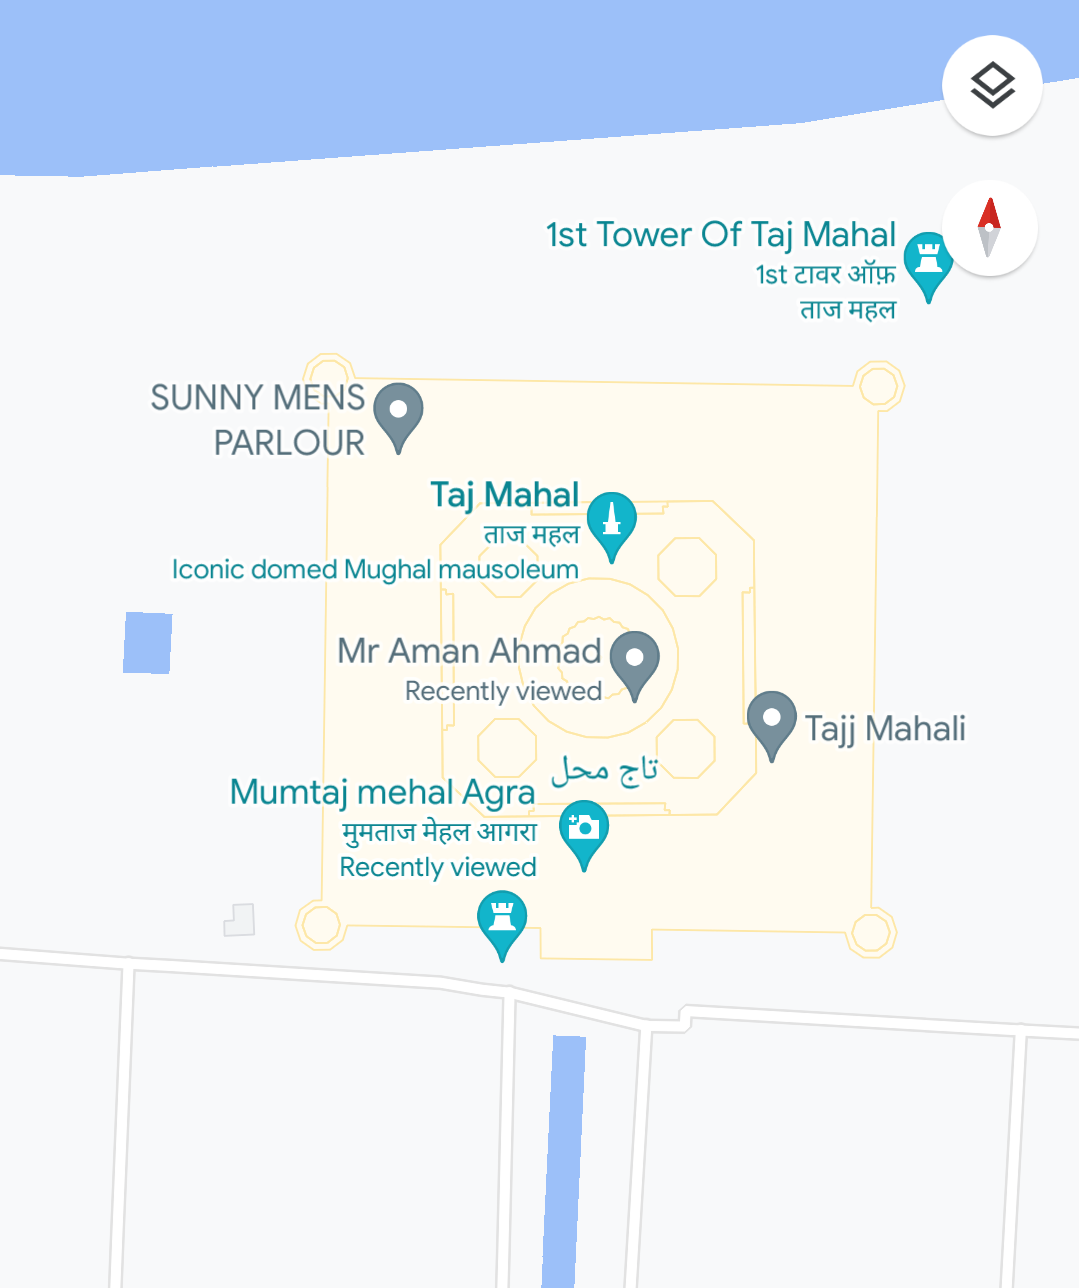 Spam markings of a parlour and some name marked over Taj Mahal in Google Maps